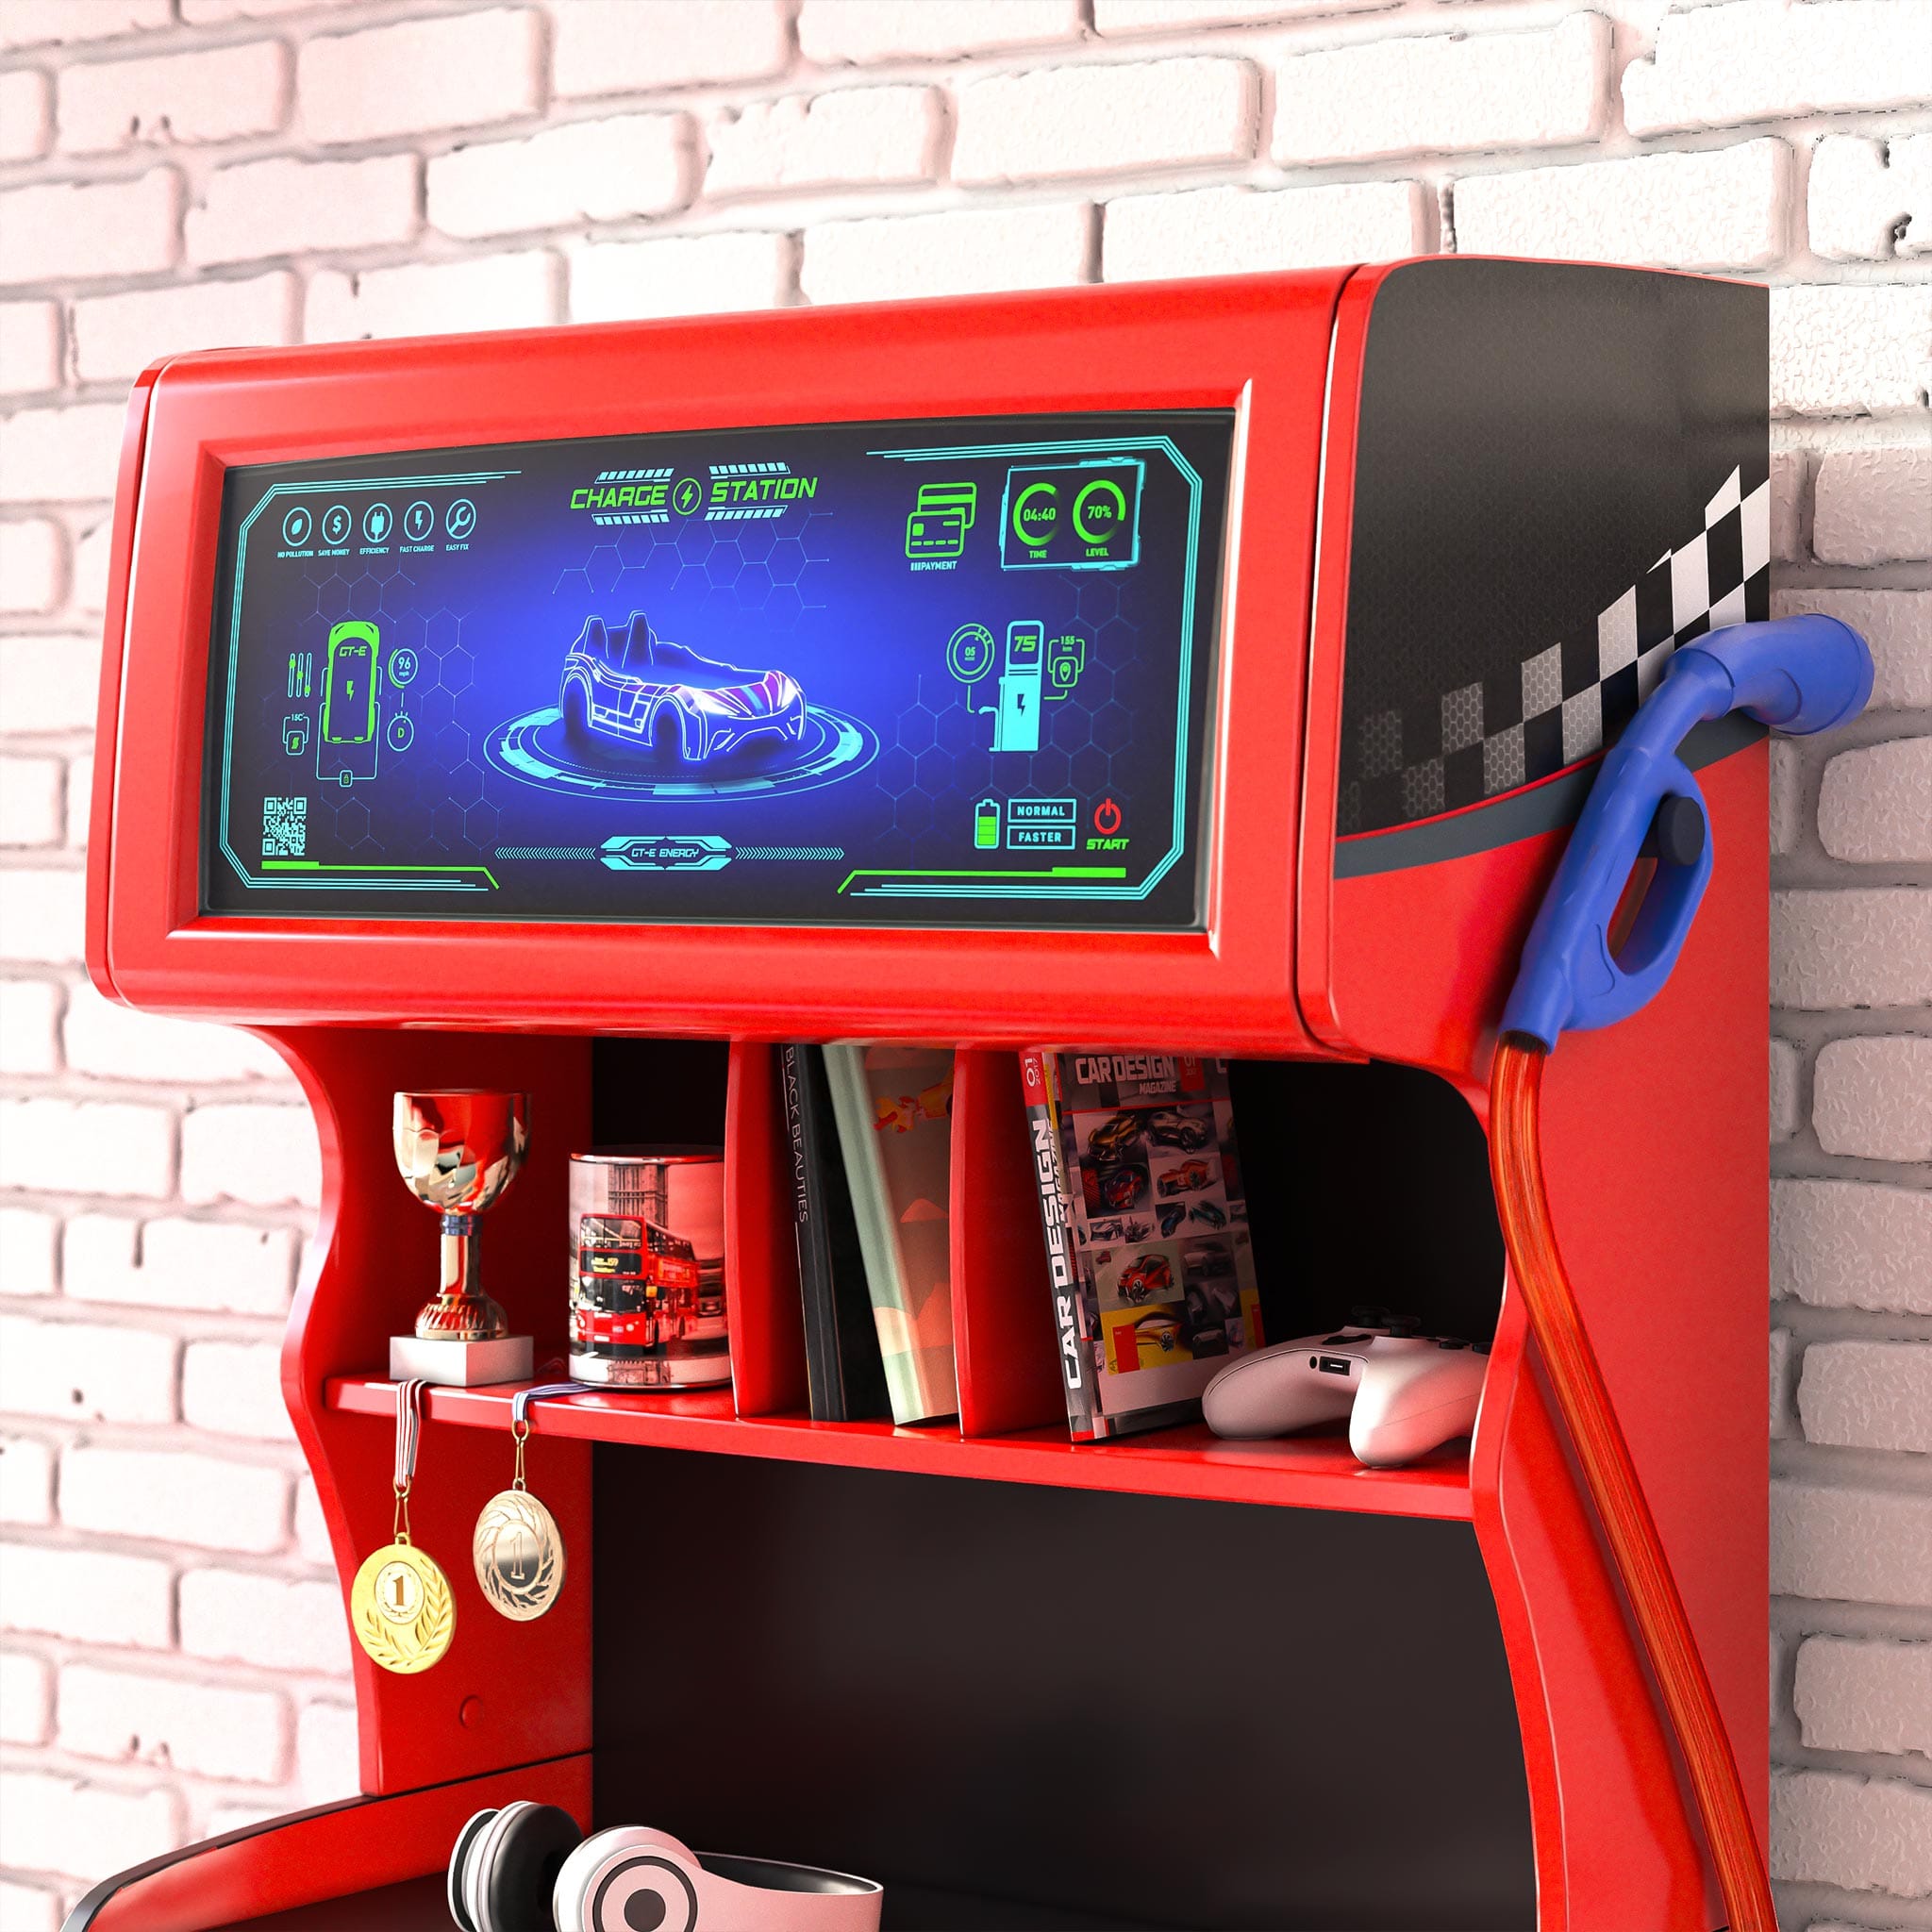 GTS EV 3 Drawer Chest with Cabinet, EV Car Charger Design, Extra Shelves, Soft-Close Drawers